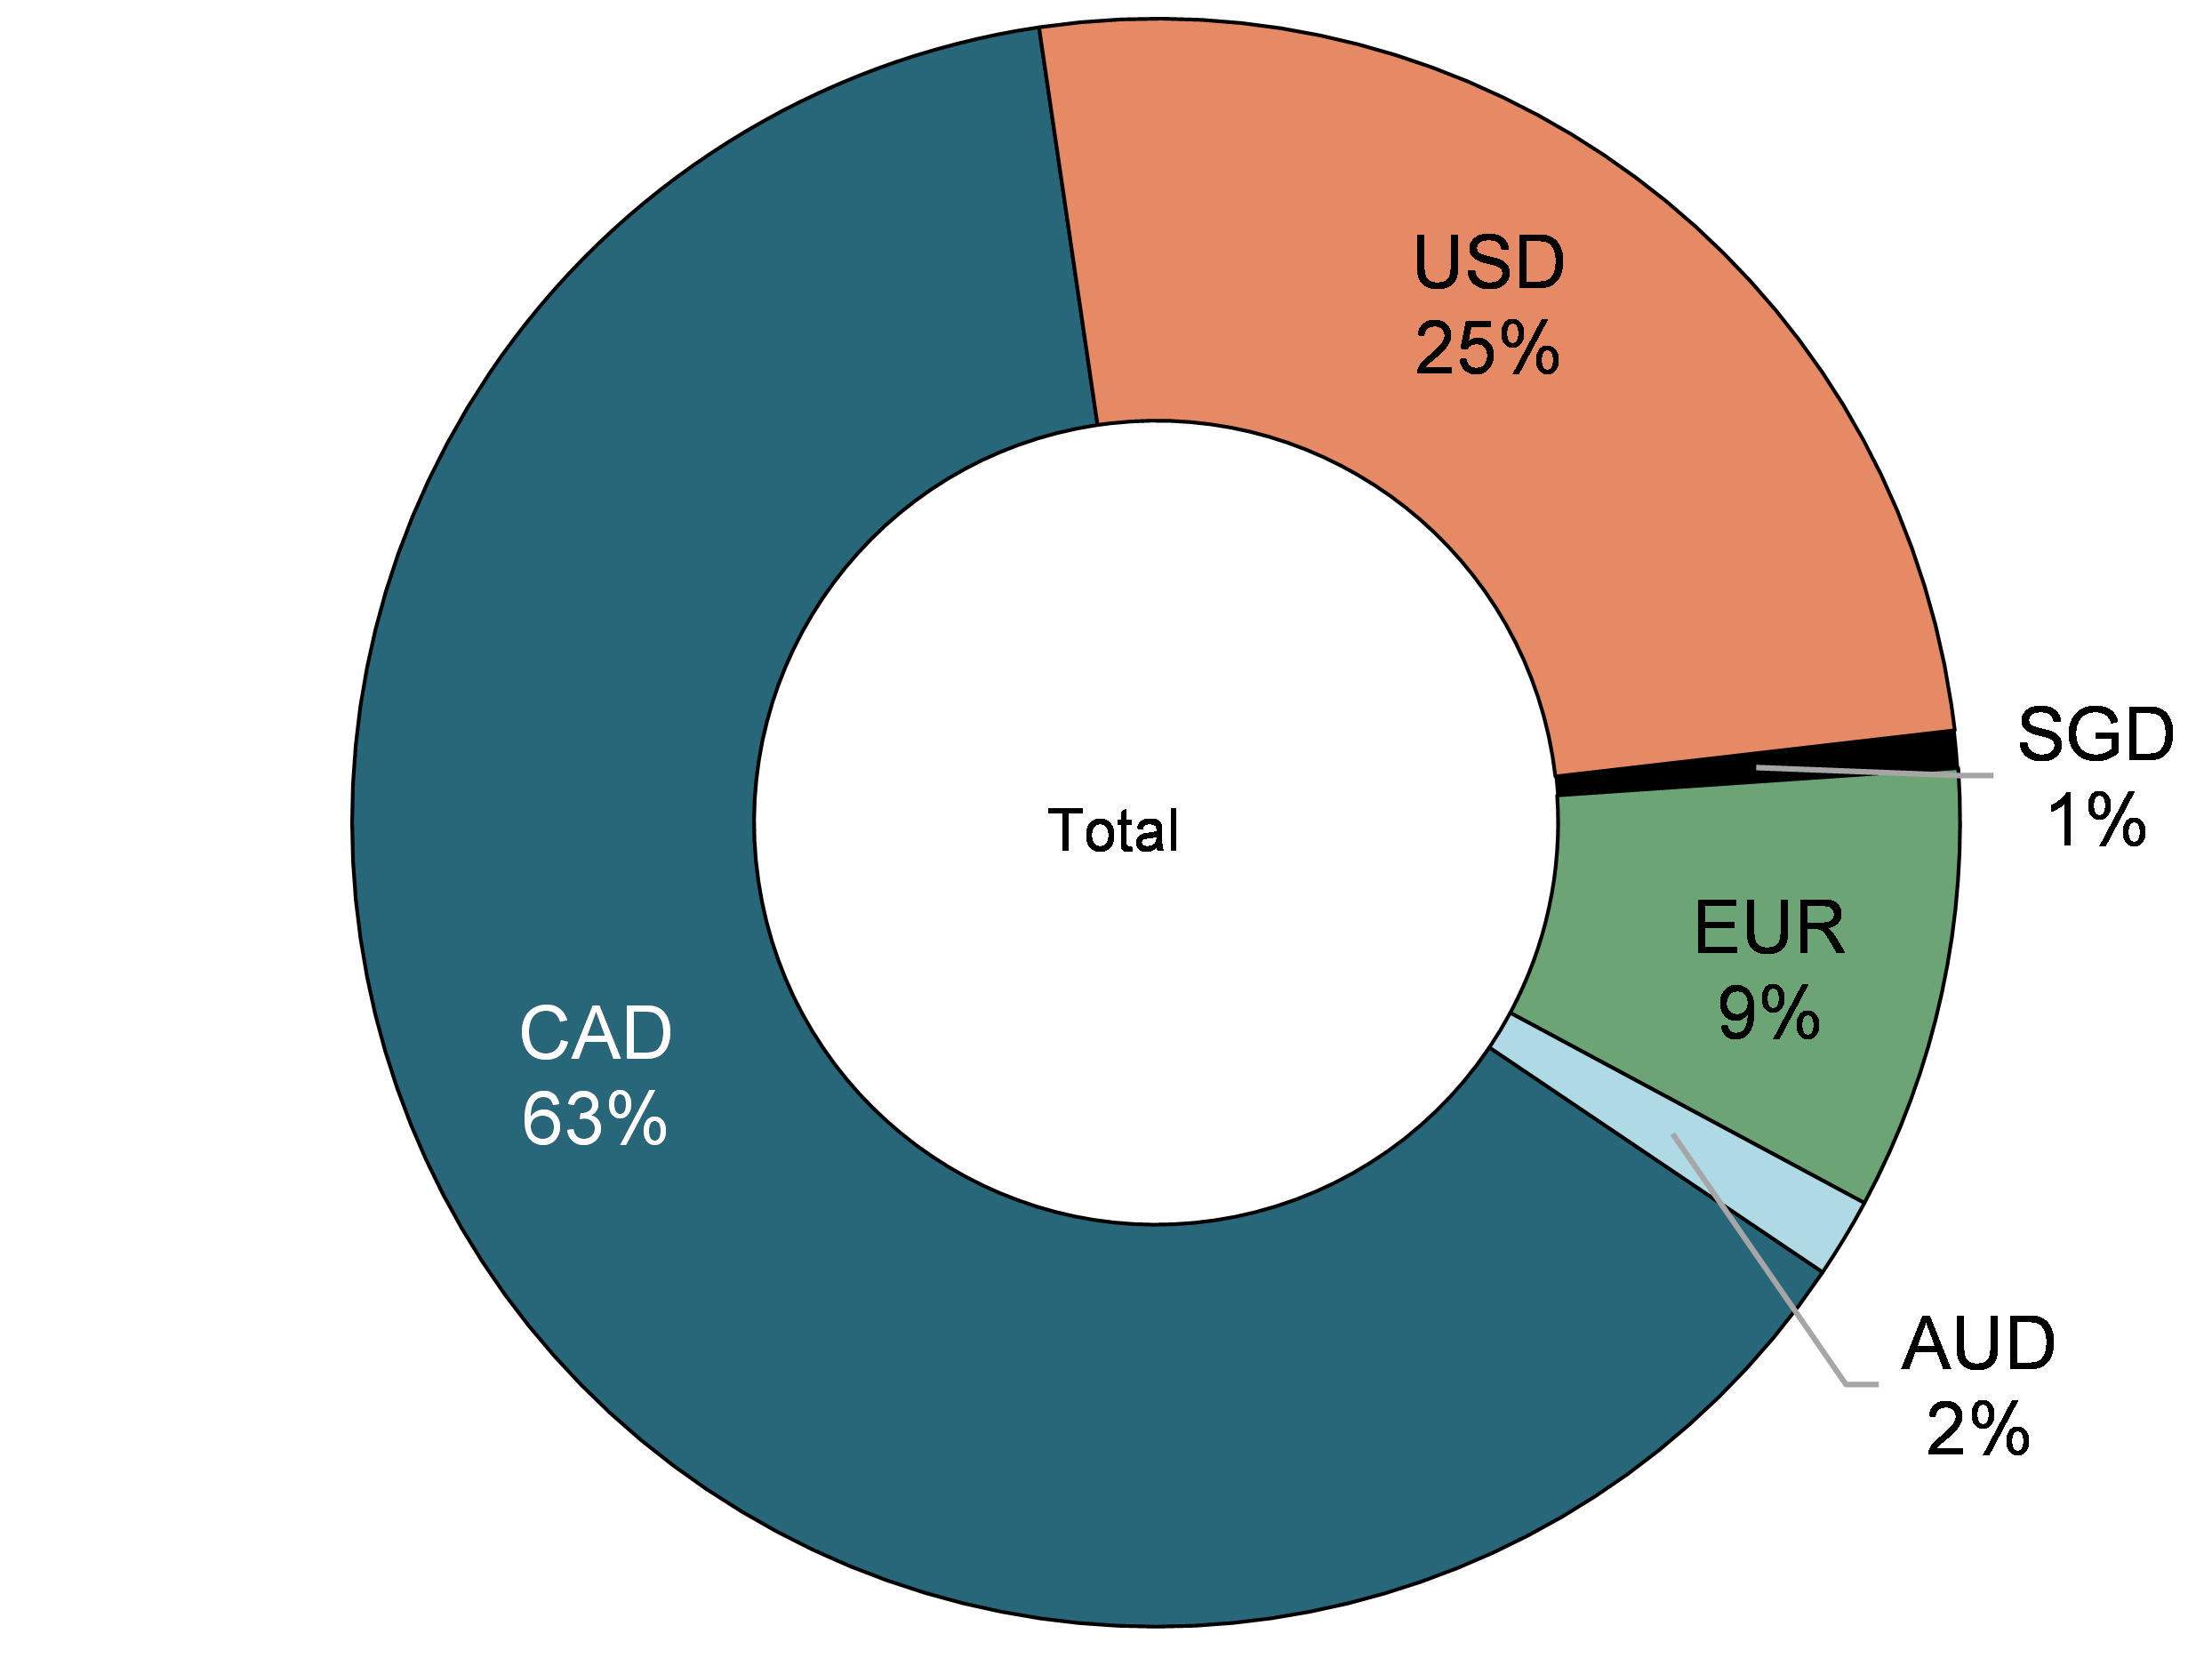 Figure A7: Share of issuance volumes by currency